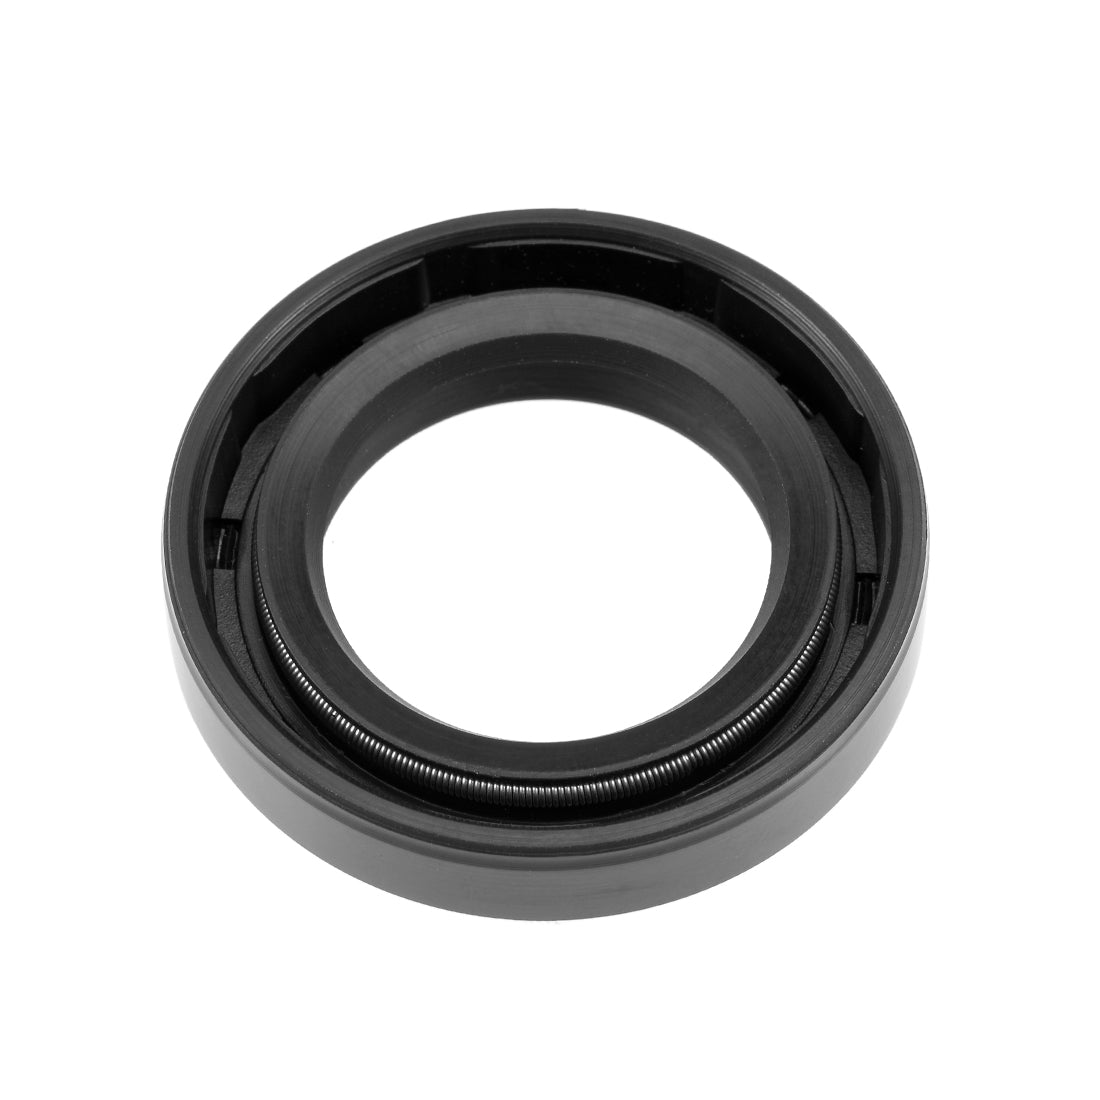 uxcell Uxcell Oil Seals, TC Inner Diameter, Nitrile Rubber Cover Double Lips 1pcs